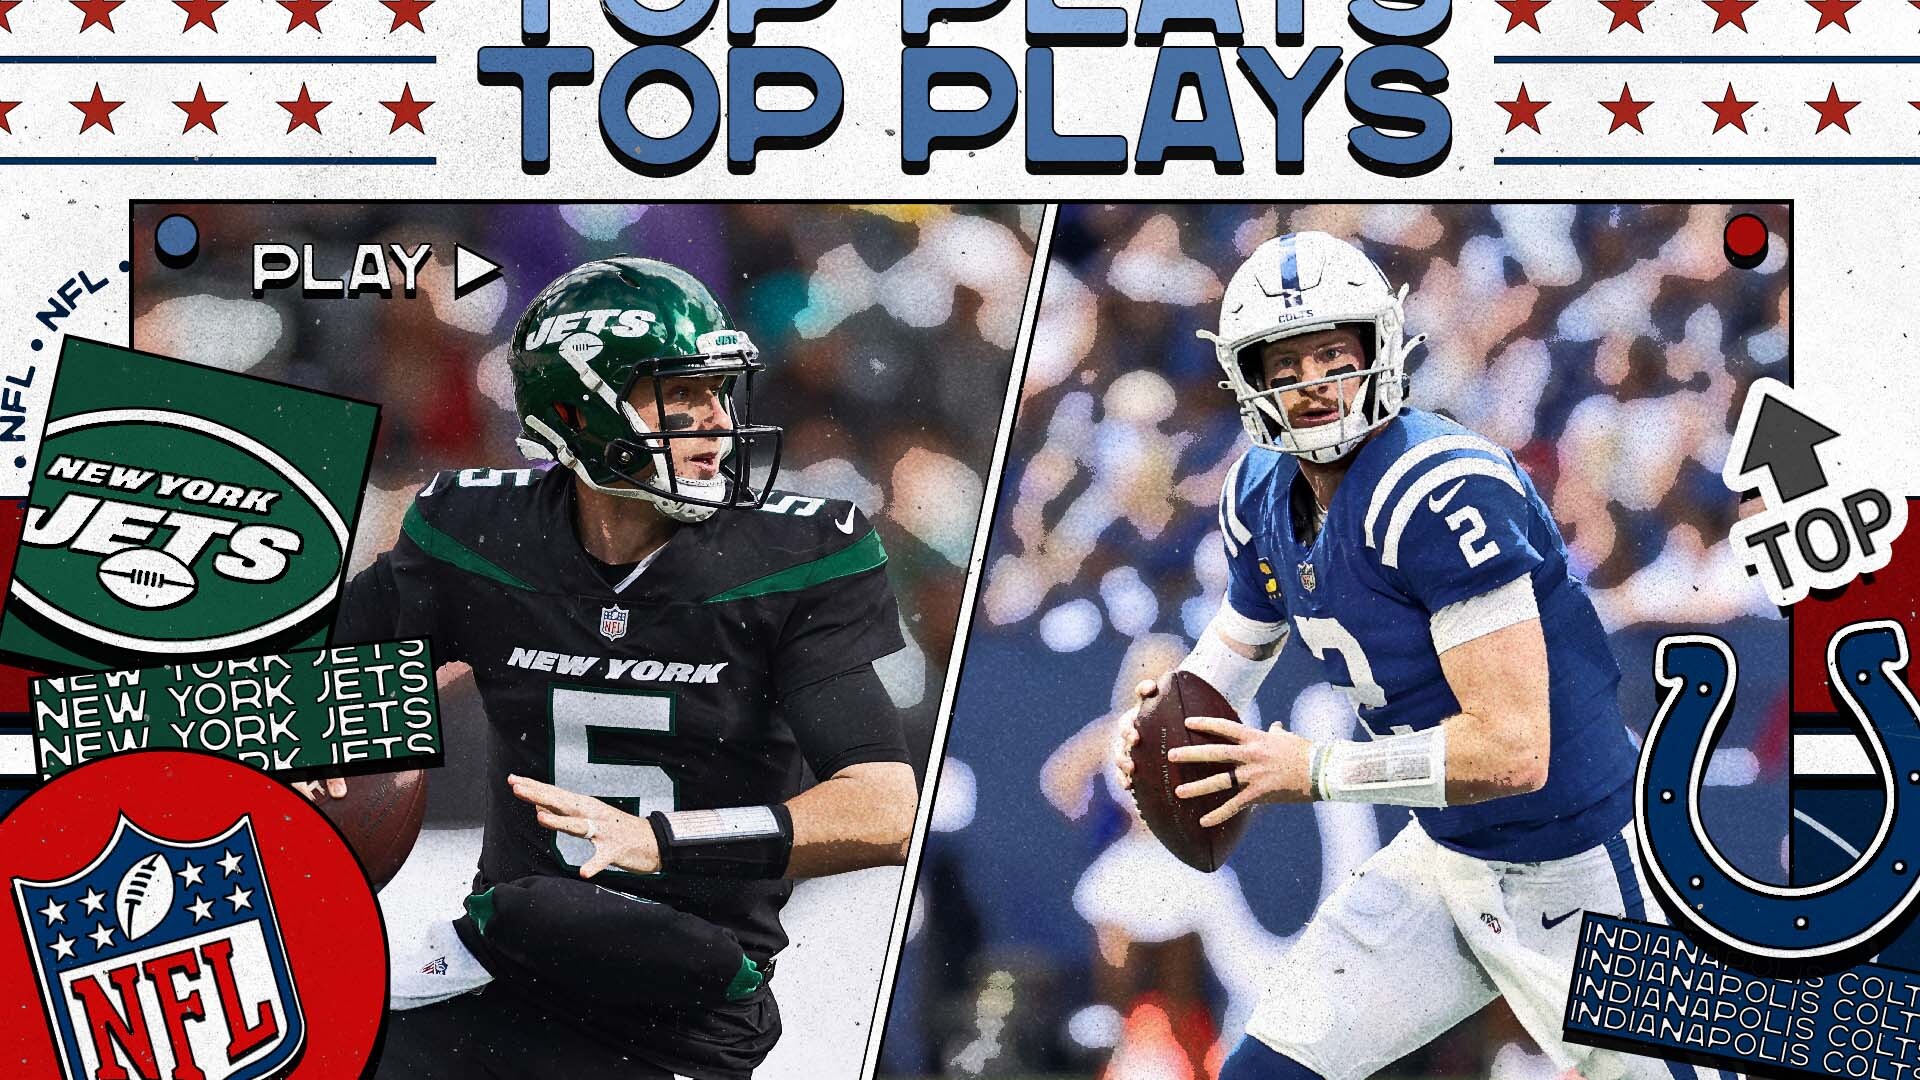 Thursday Night Football top plays: Wentz, Colts dominate Jets at home